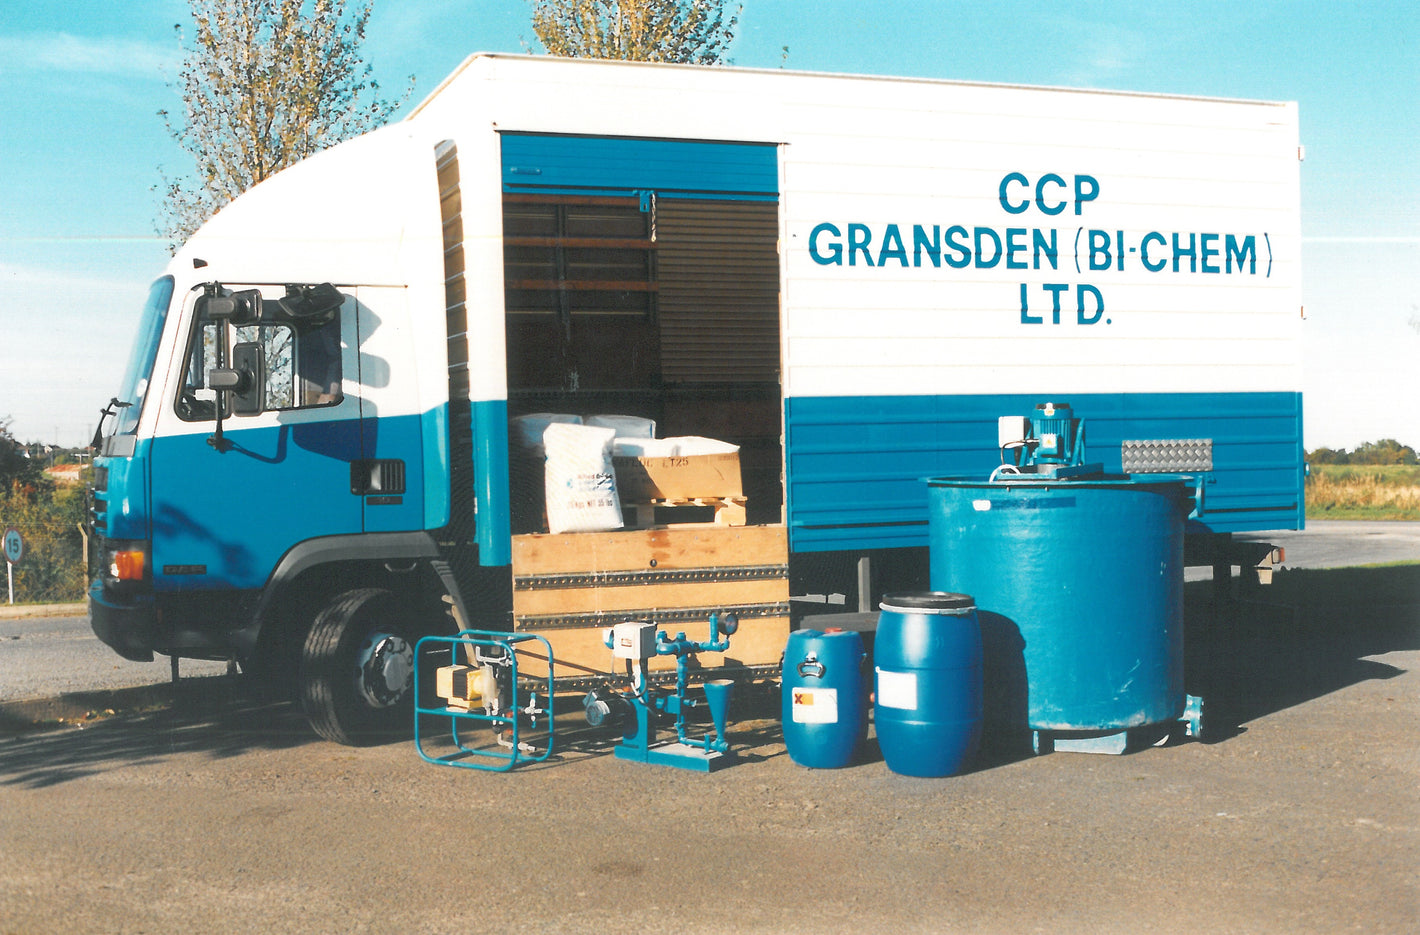 One of CCP Gransden's lorries in the 1980's, painted white and blue and with CCP Gransden written on the side. Several drums sit in front of the lorry.